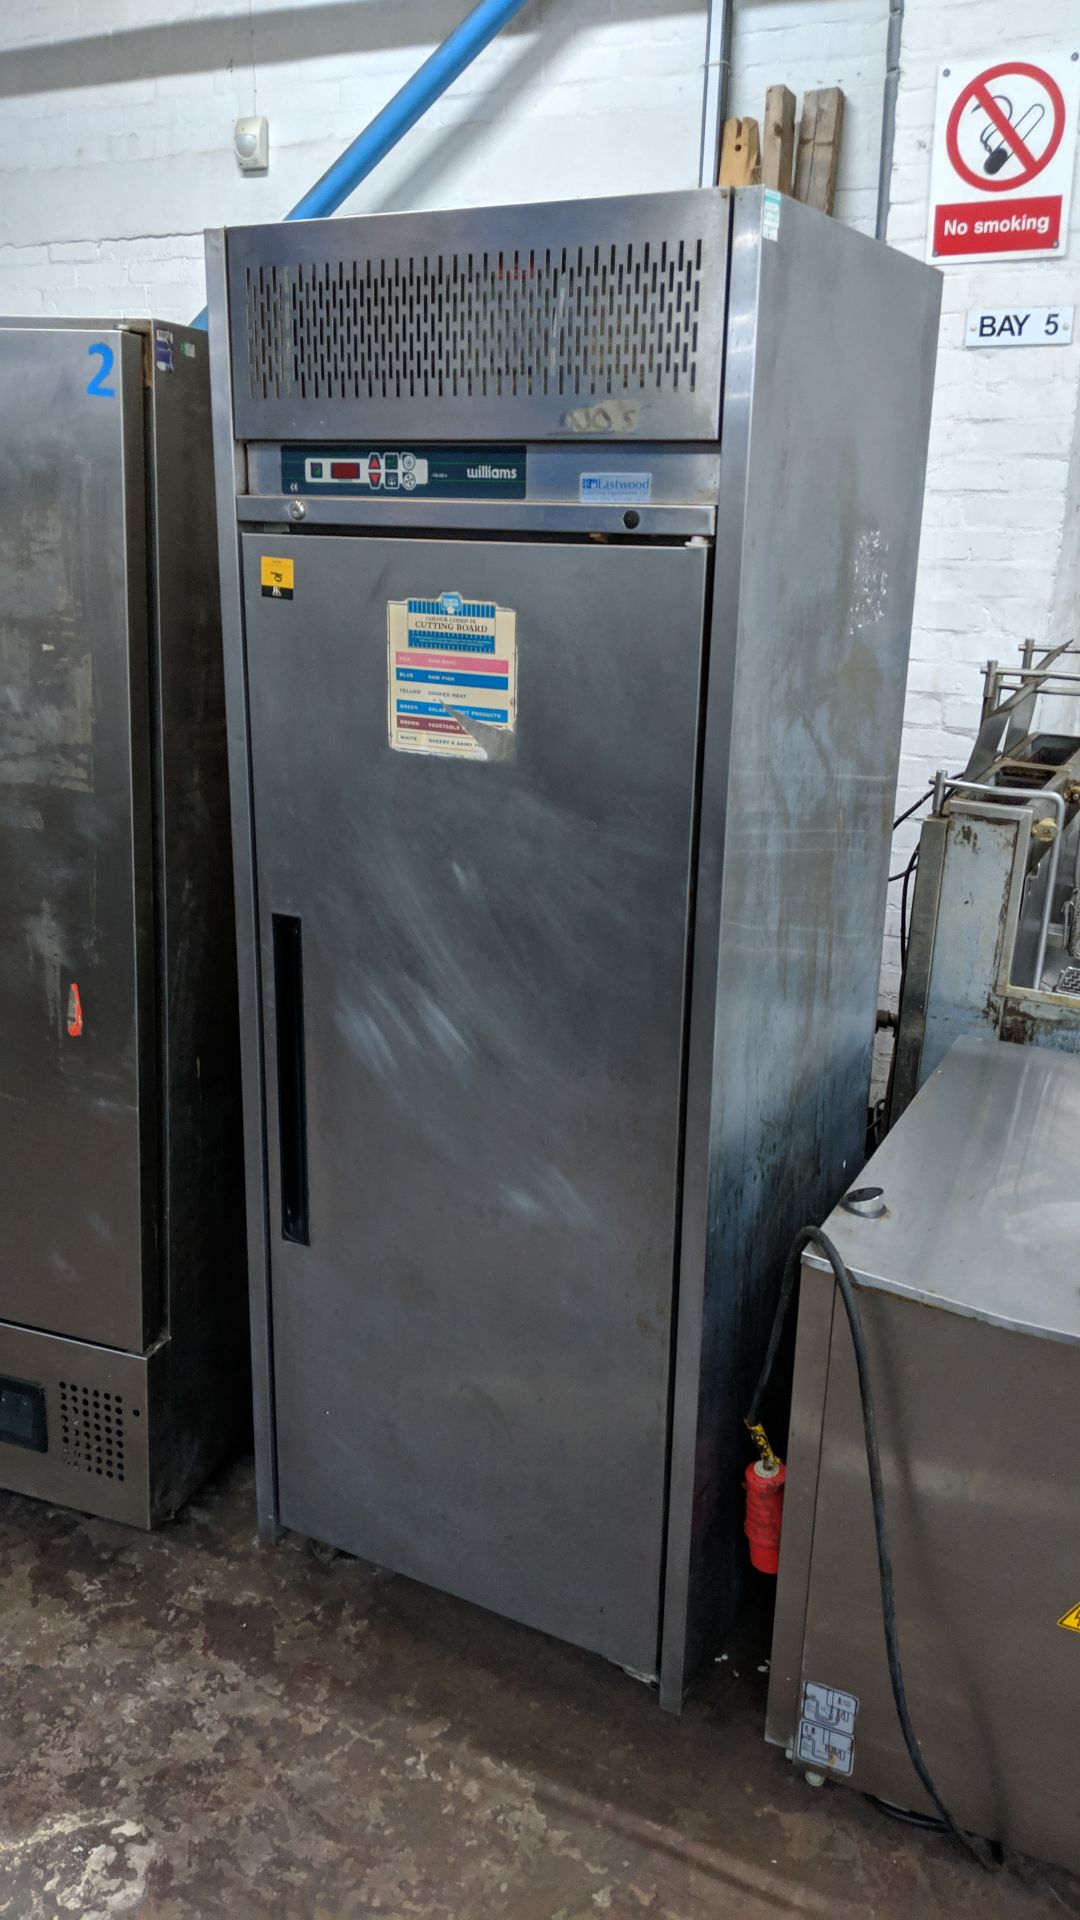 Williams stainless steel floorstanding freezer IMPORTANT: Please remember goods successfully bid - Image 2 of 4